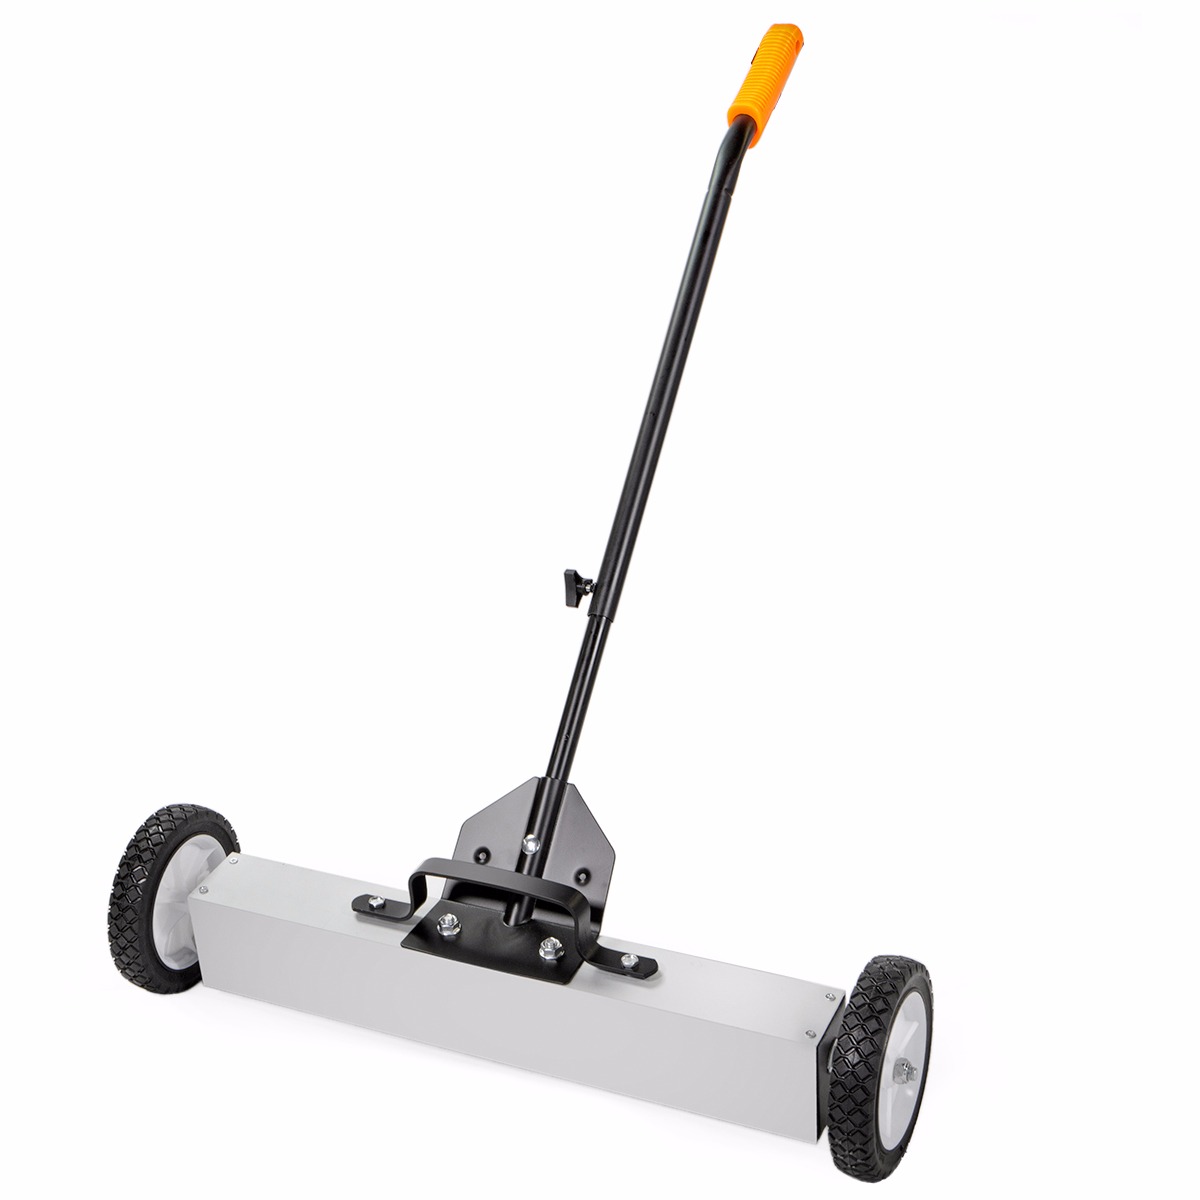 Wholesale Dealers of Magnetic Sweeper Export to Israel